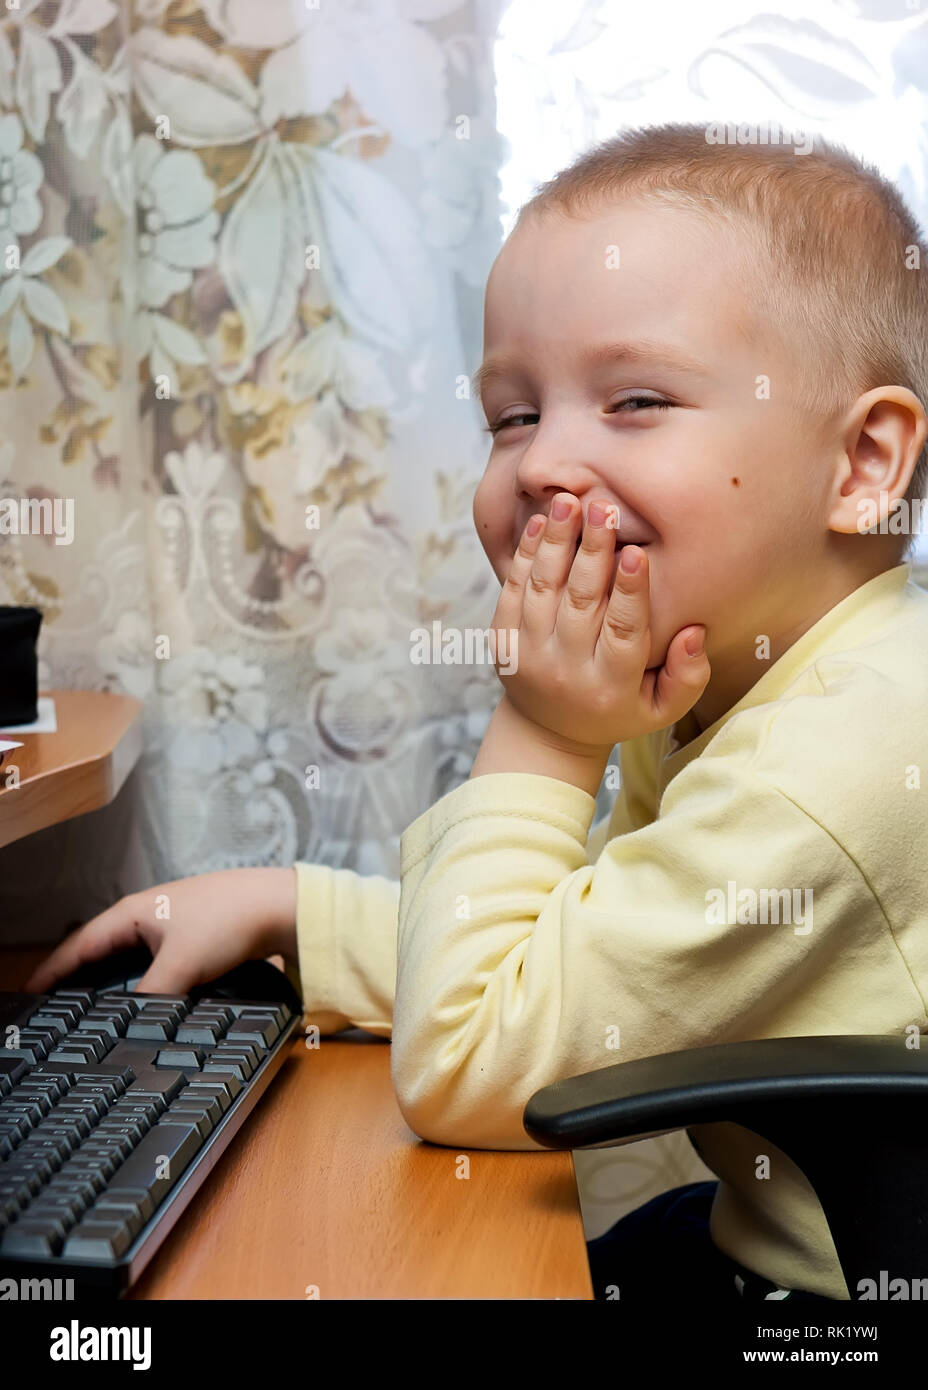 young handsome boy is sitting on chair and working seriously with computer mouse Stock Photo